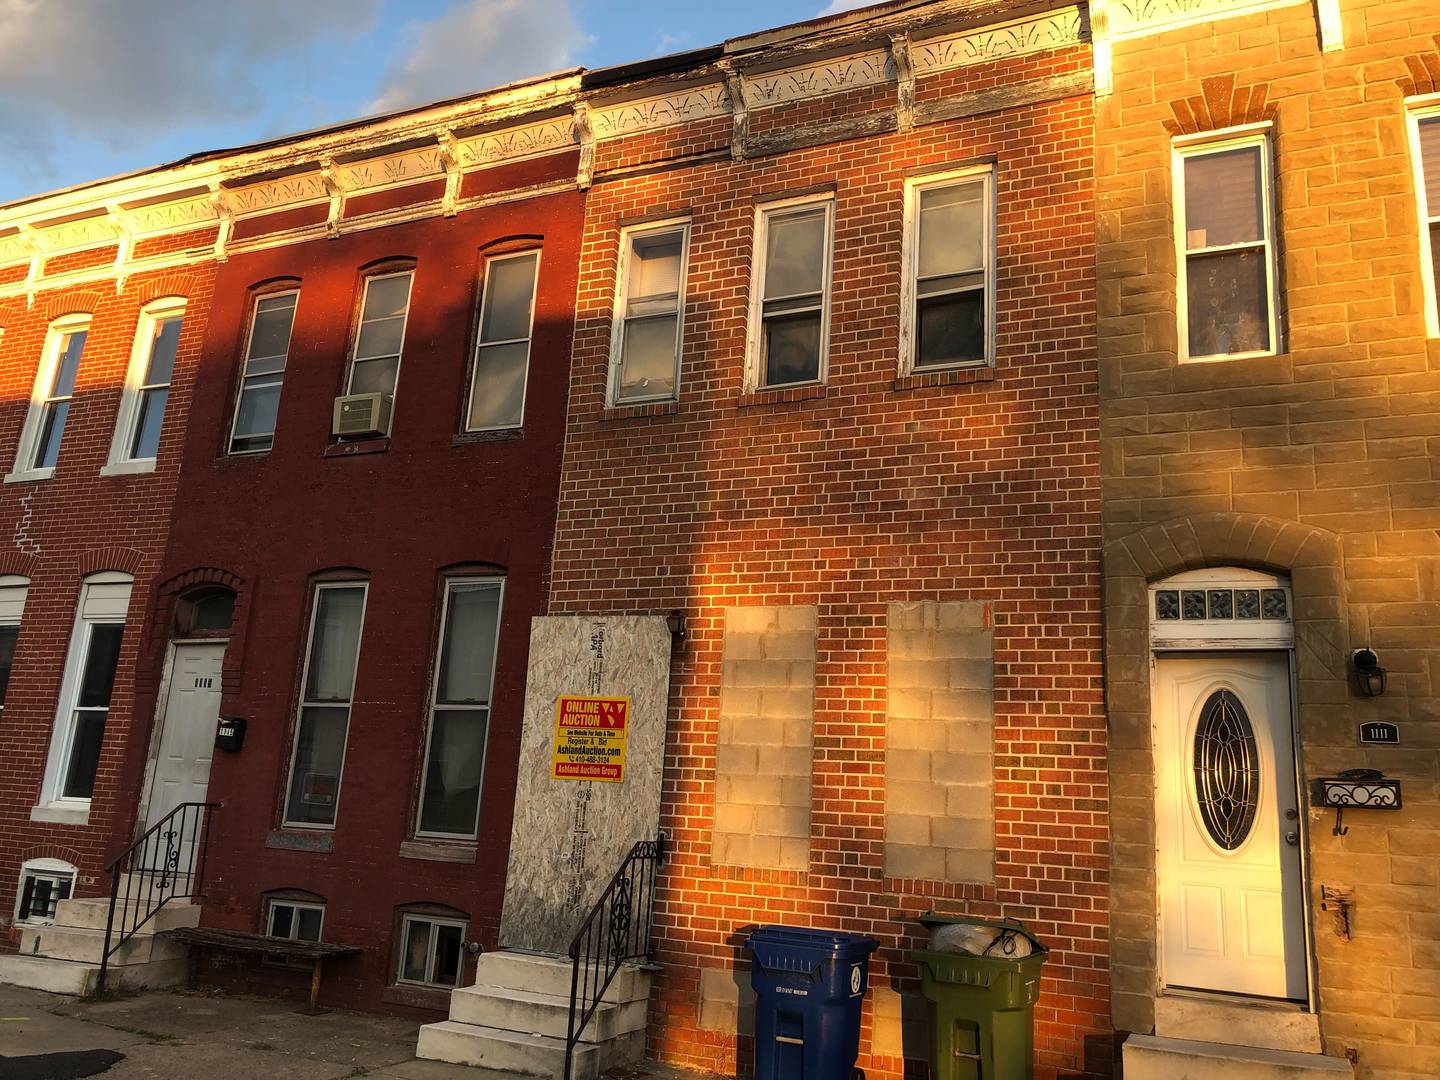 A house at 1113 North Carrollton Avenue was among 37 vacant or abandoned homes auctioned the last week of November and the first week of December by the Housing Authority of Baltimore City.